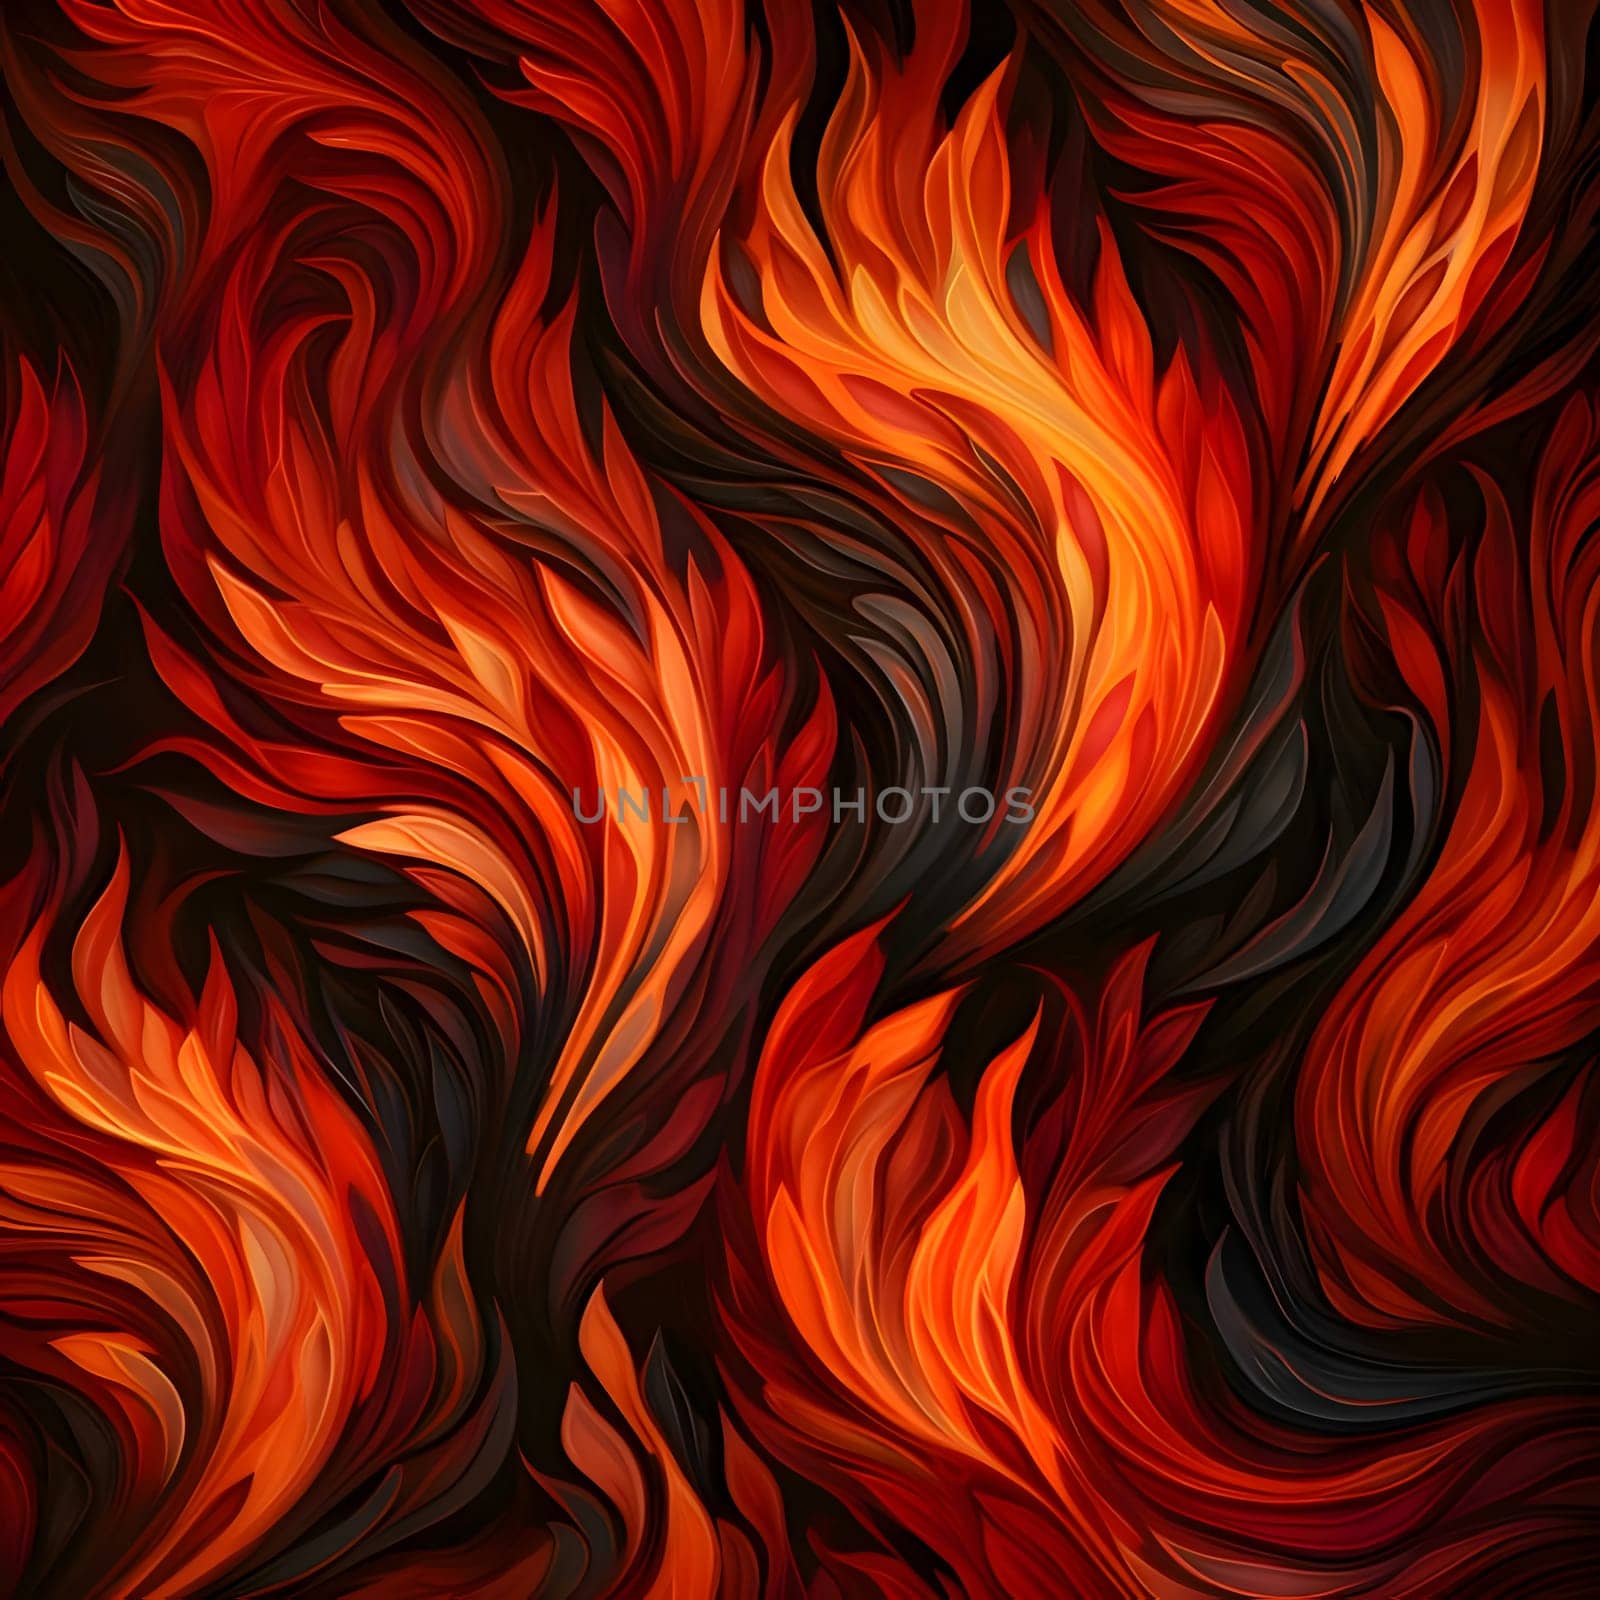 Patterns and banners backgrounds: Abstract background with fire flames. Vector illustration for your design. EPS 10